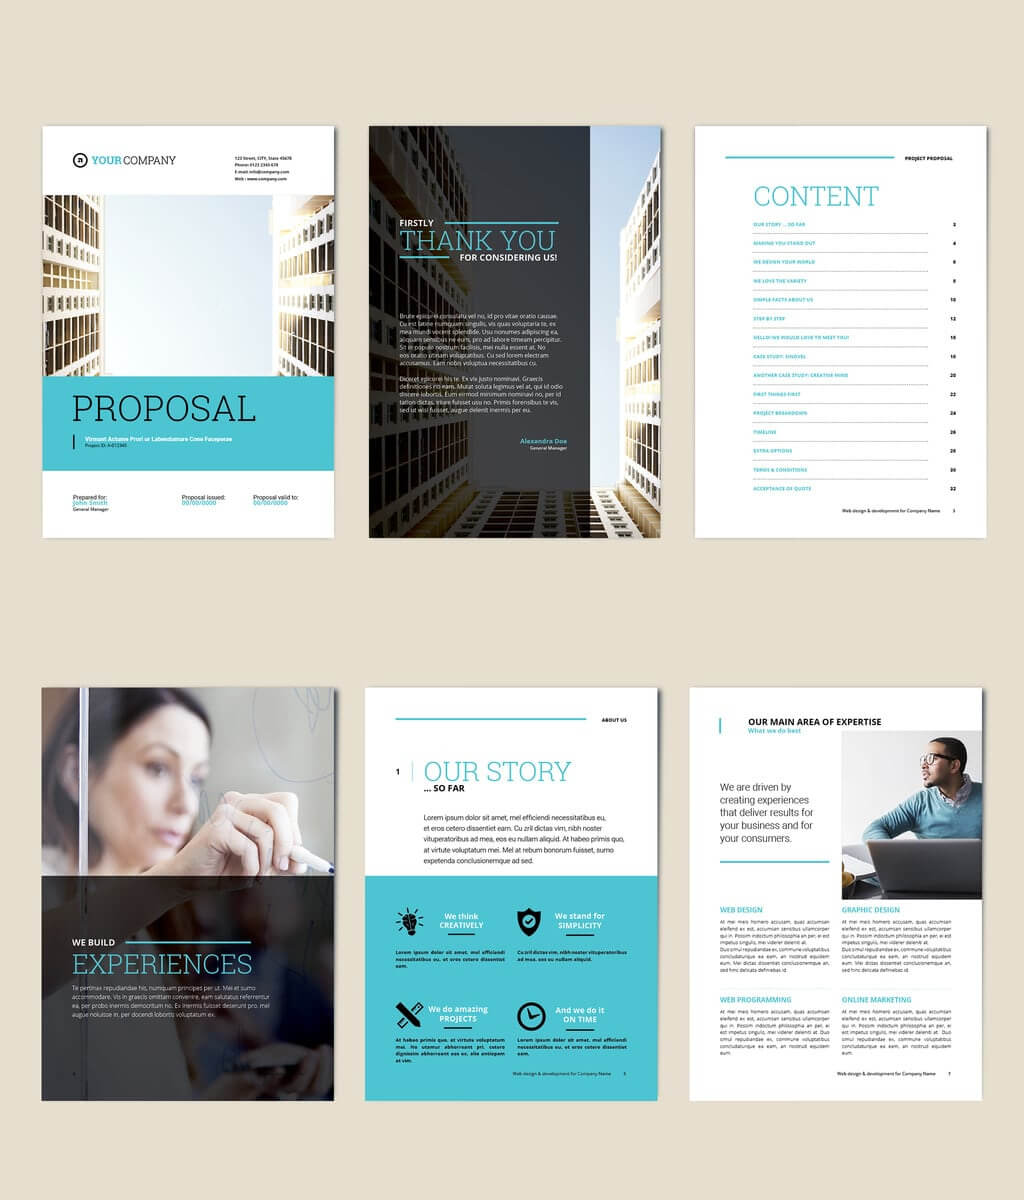 75 Fresh Indesign Templates And Where To Find More In Indesign Templates Free Download Brochure